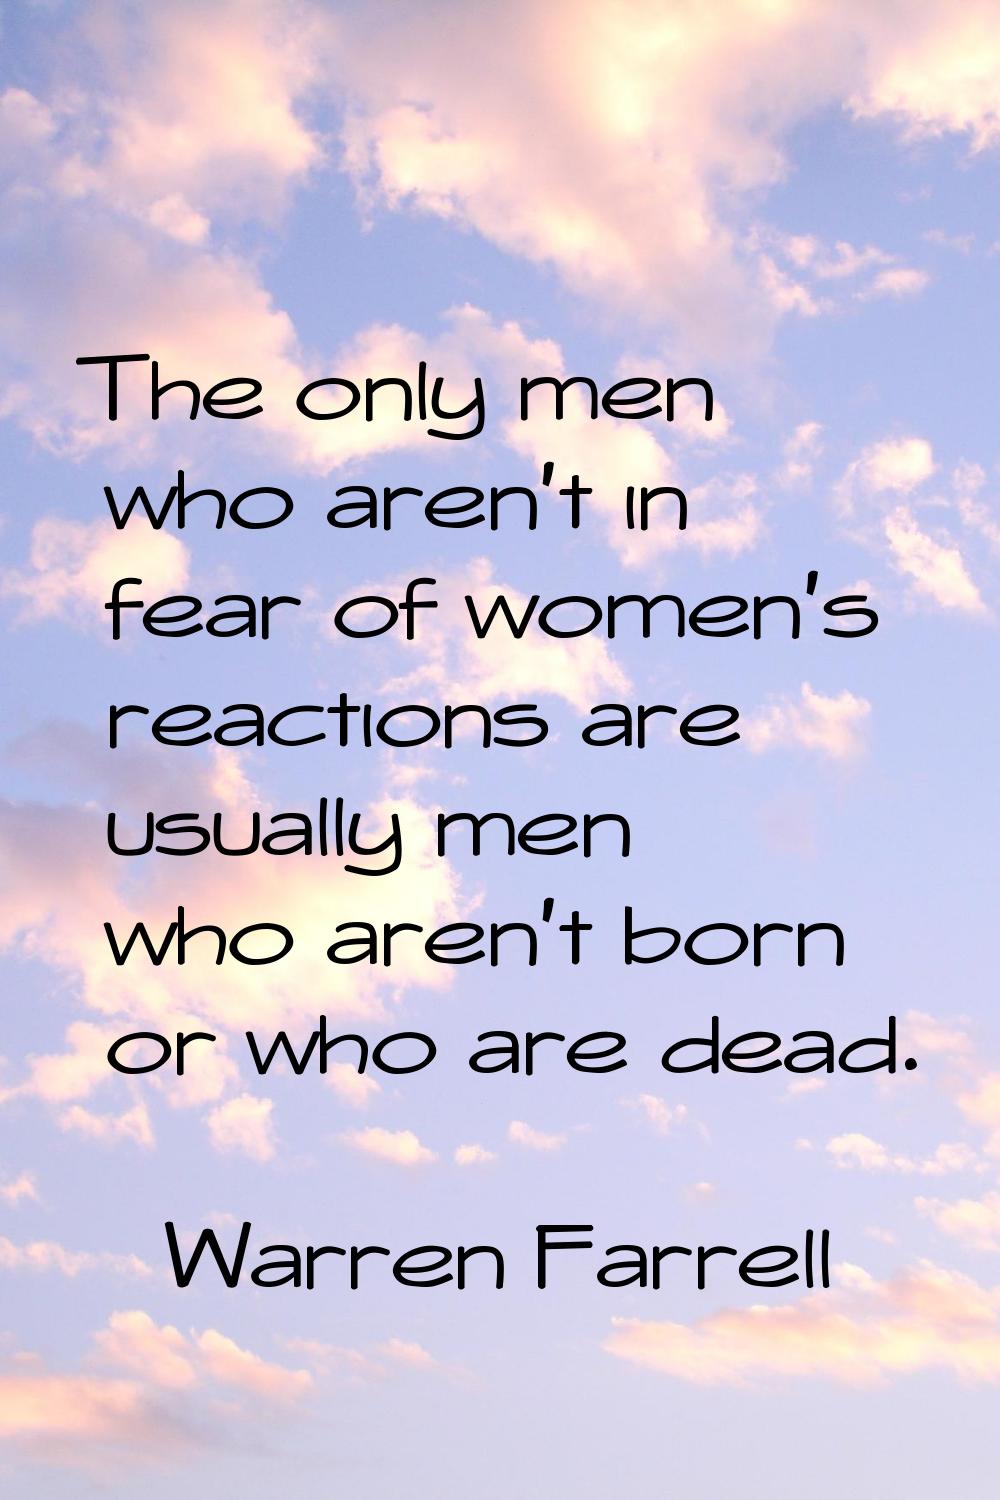 The only men who aren't in fear of women's reactions are usually men who aren't born or who are dea